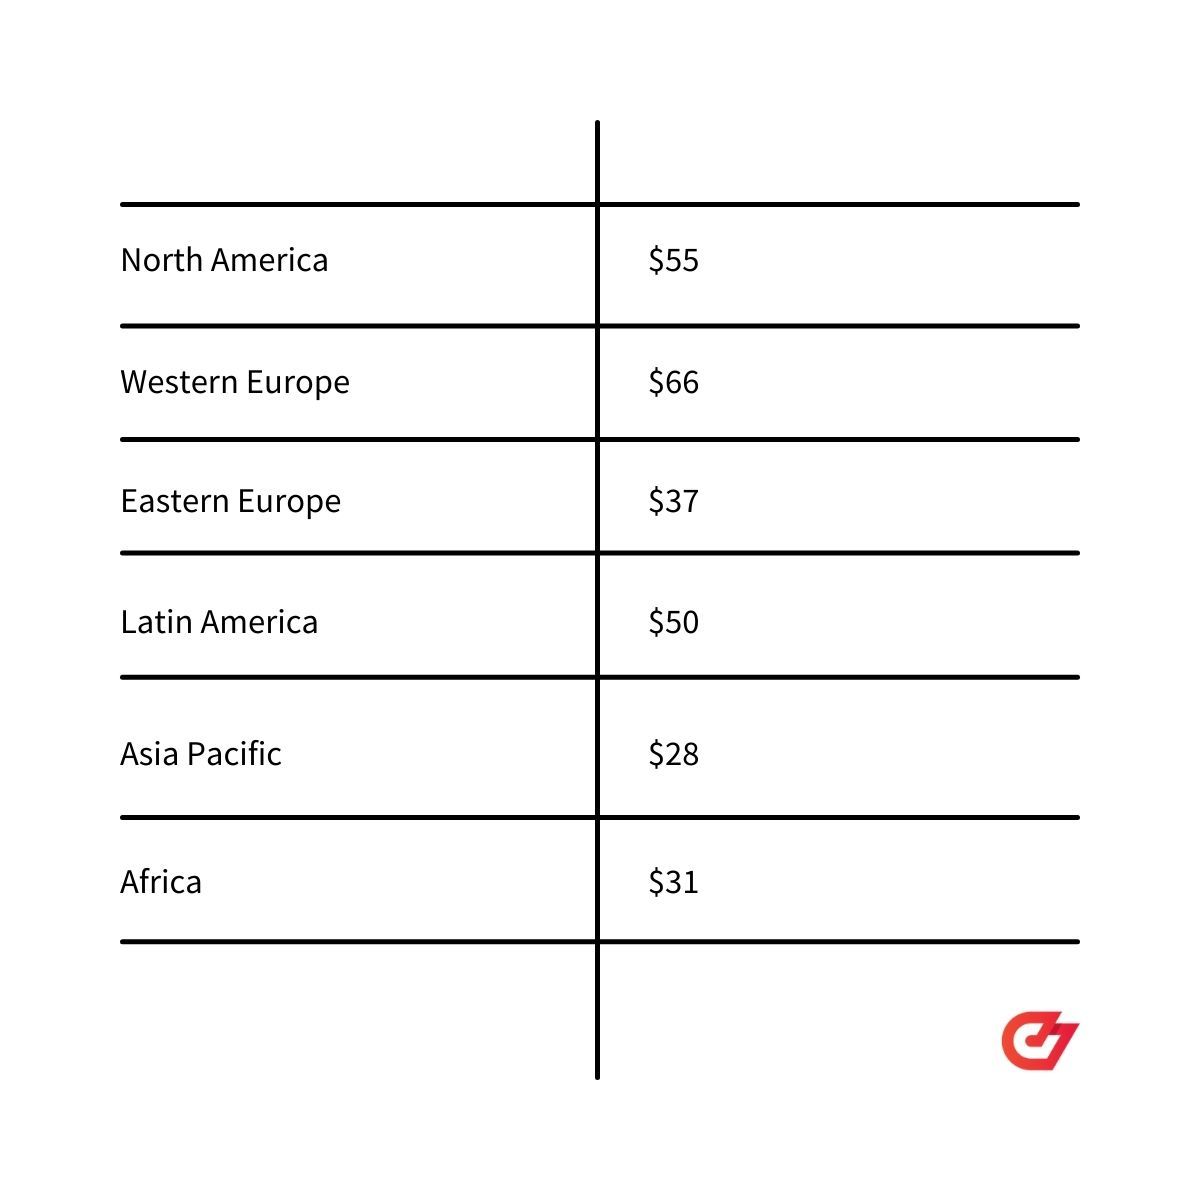 Average hourly rate for software developers by geographic region